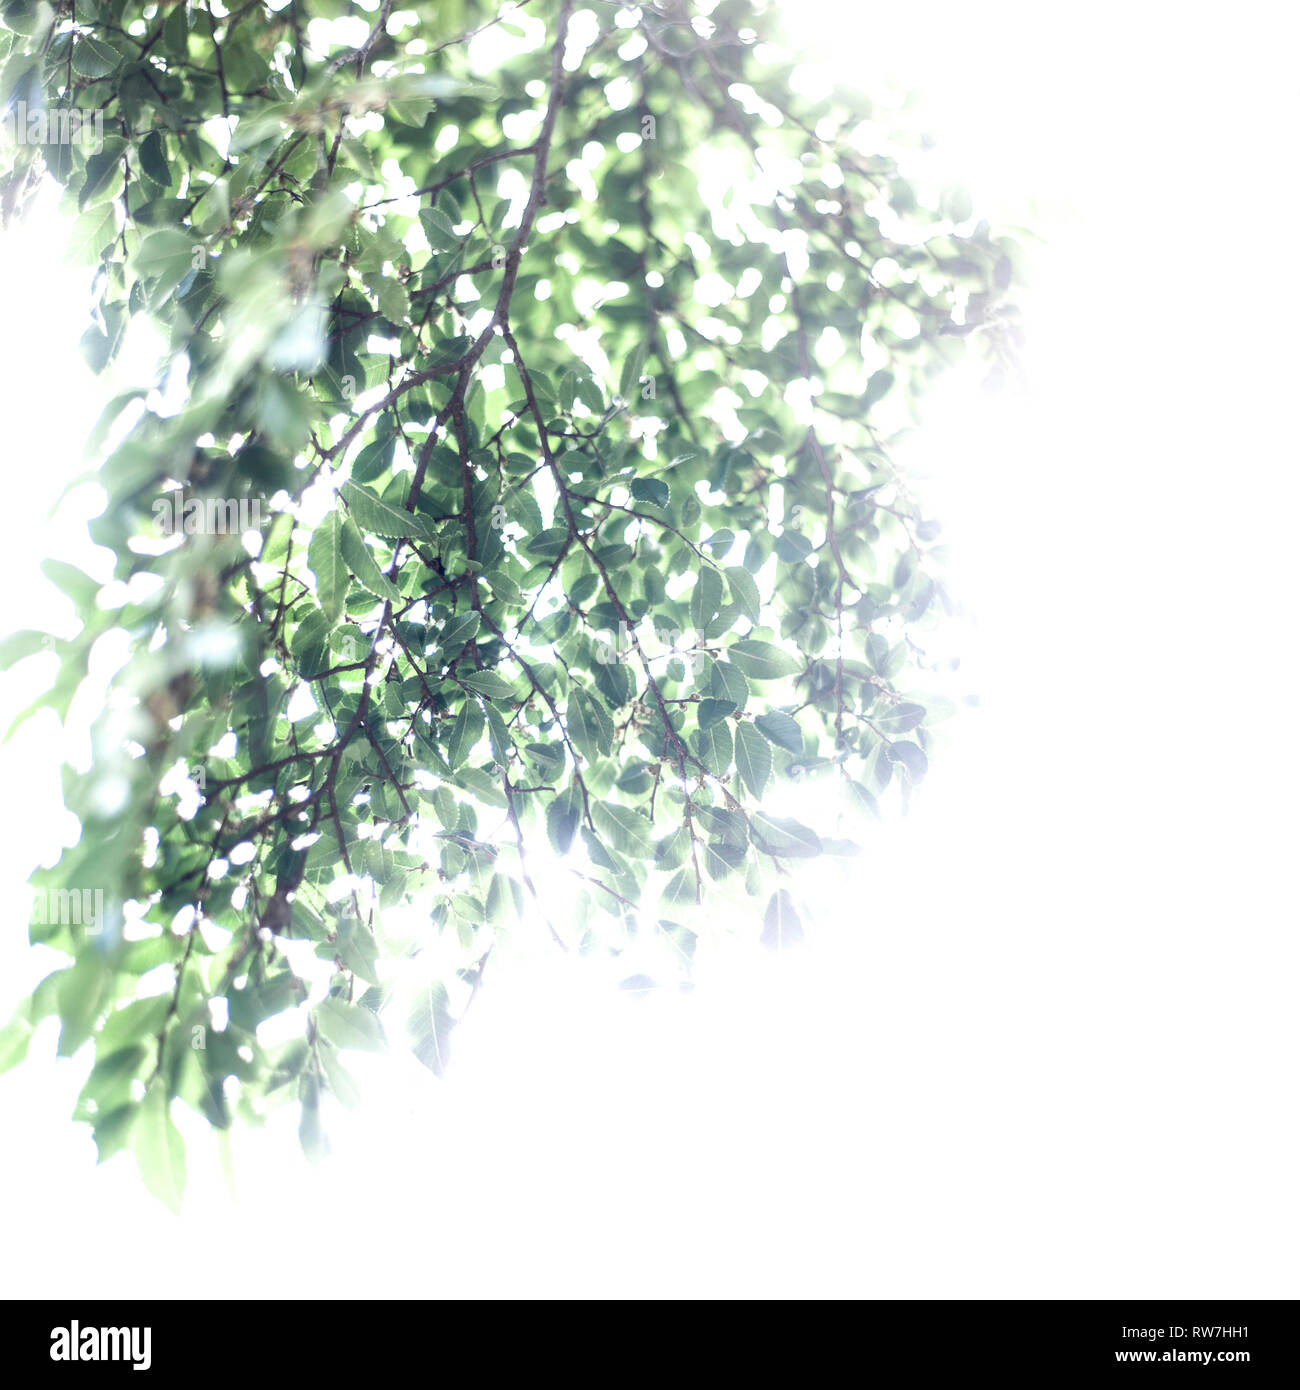 Chinese Elm, Ulmus parvifolia, Tree Branches with Green Leaves against White Sky Stock Photo